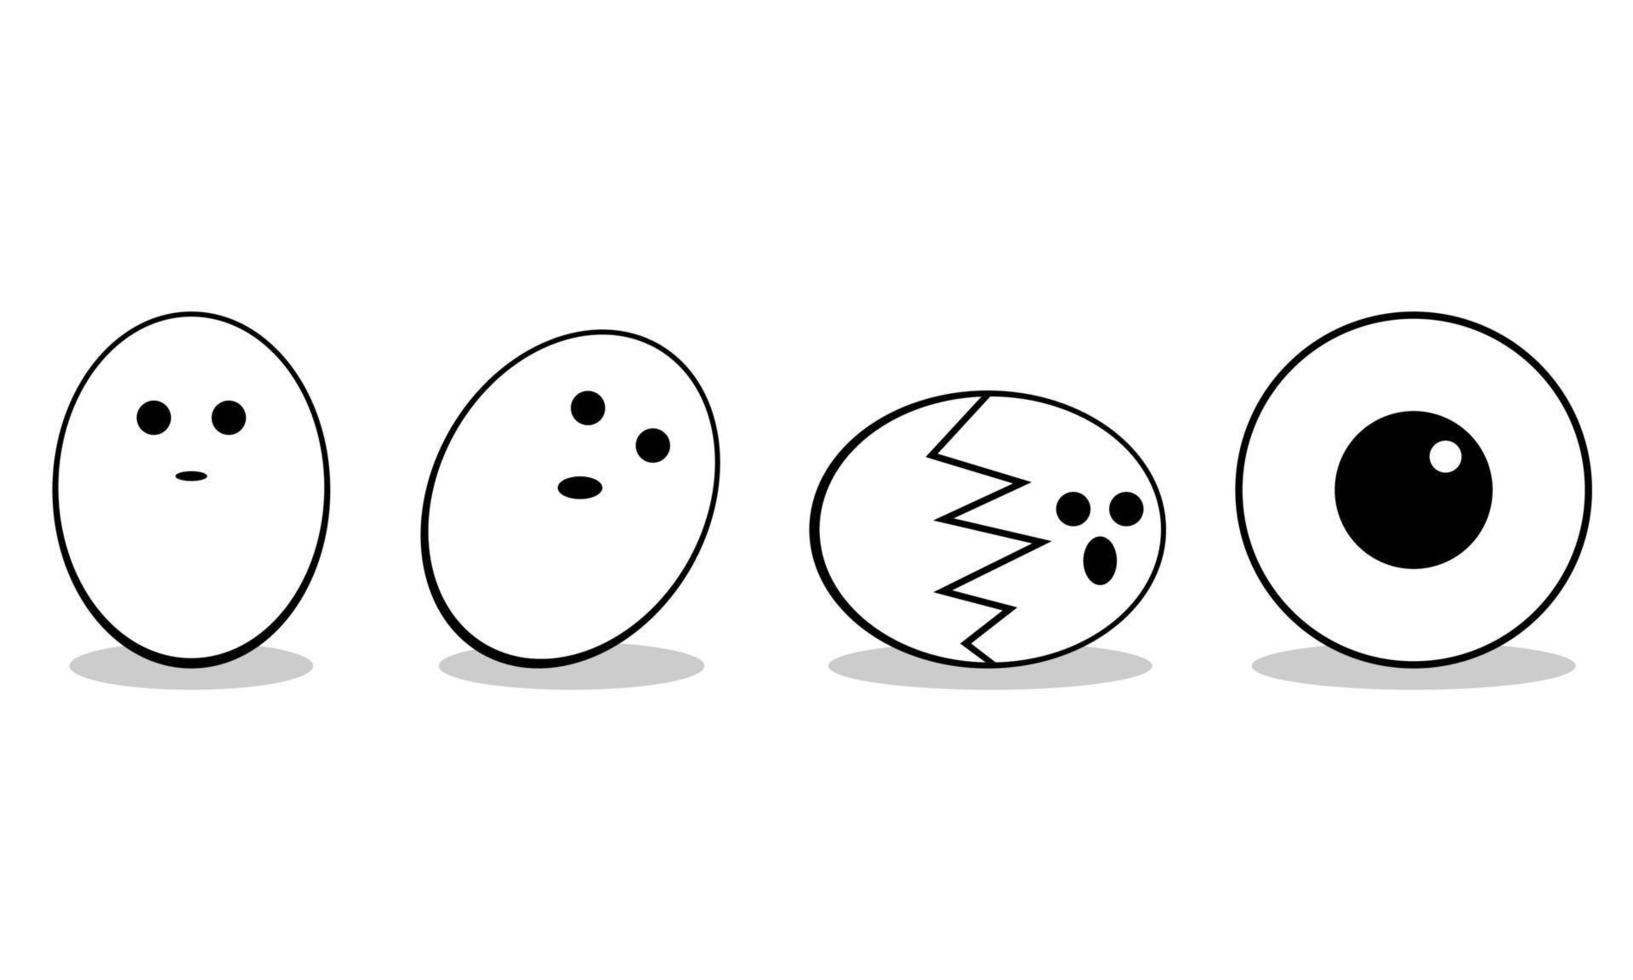 Cute cartoon character eggs chicken crack to fried egg on white background flat black icon vector design.